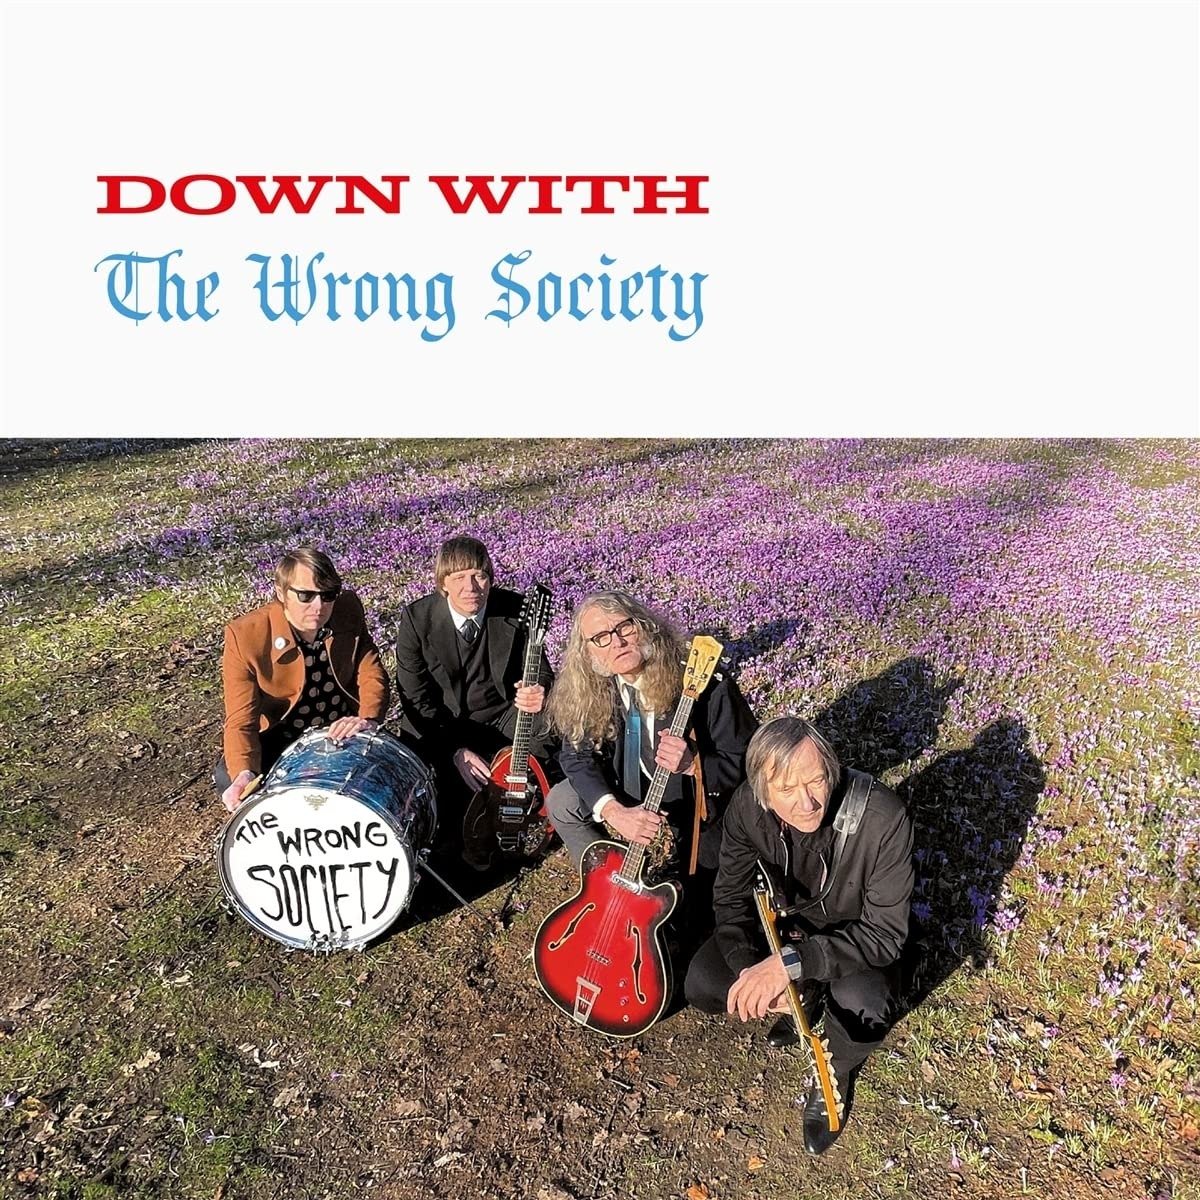 CD Shop - WRONG SOCIETY DOWN WITH